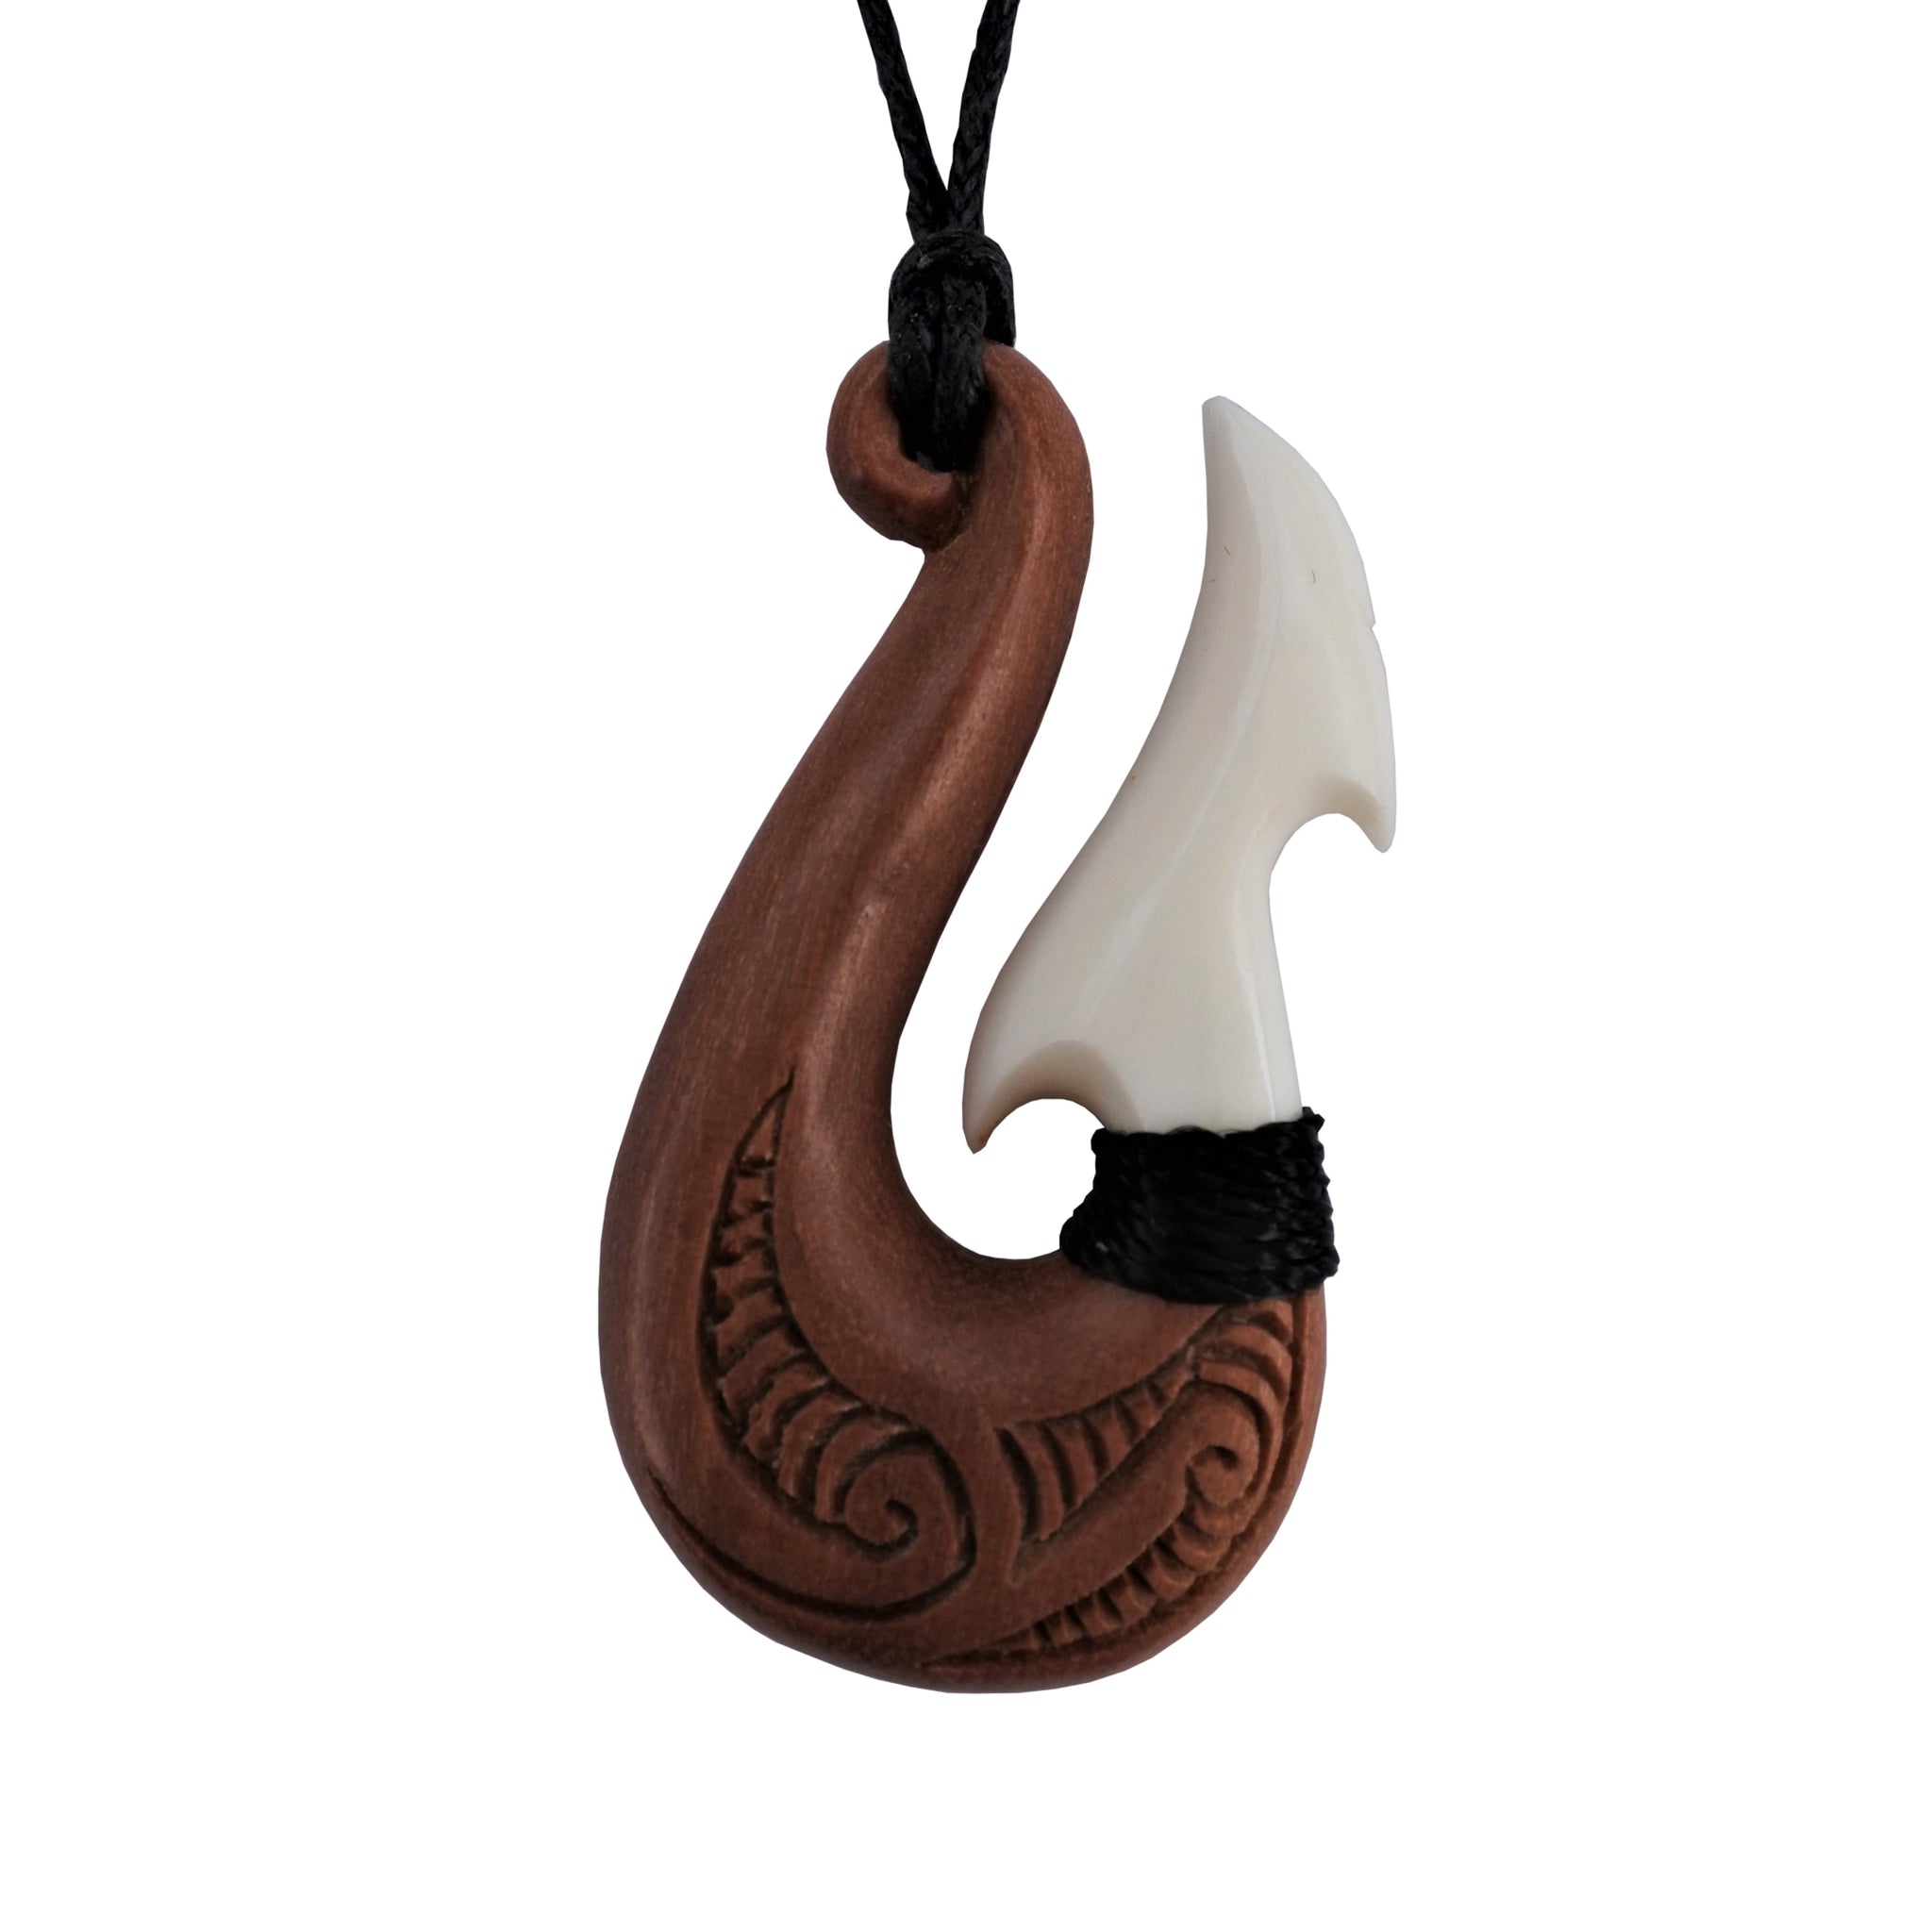 Earthbound Pacific Stylized Maori Hawaiian Black Horn Hammerhead Fish Hook  Necklace with Camo Cord and Scrimshaw | Amazon.com